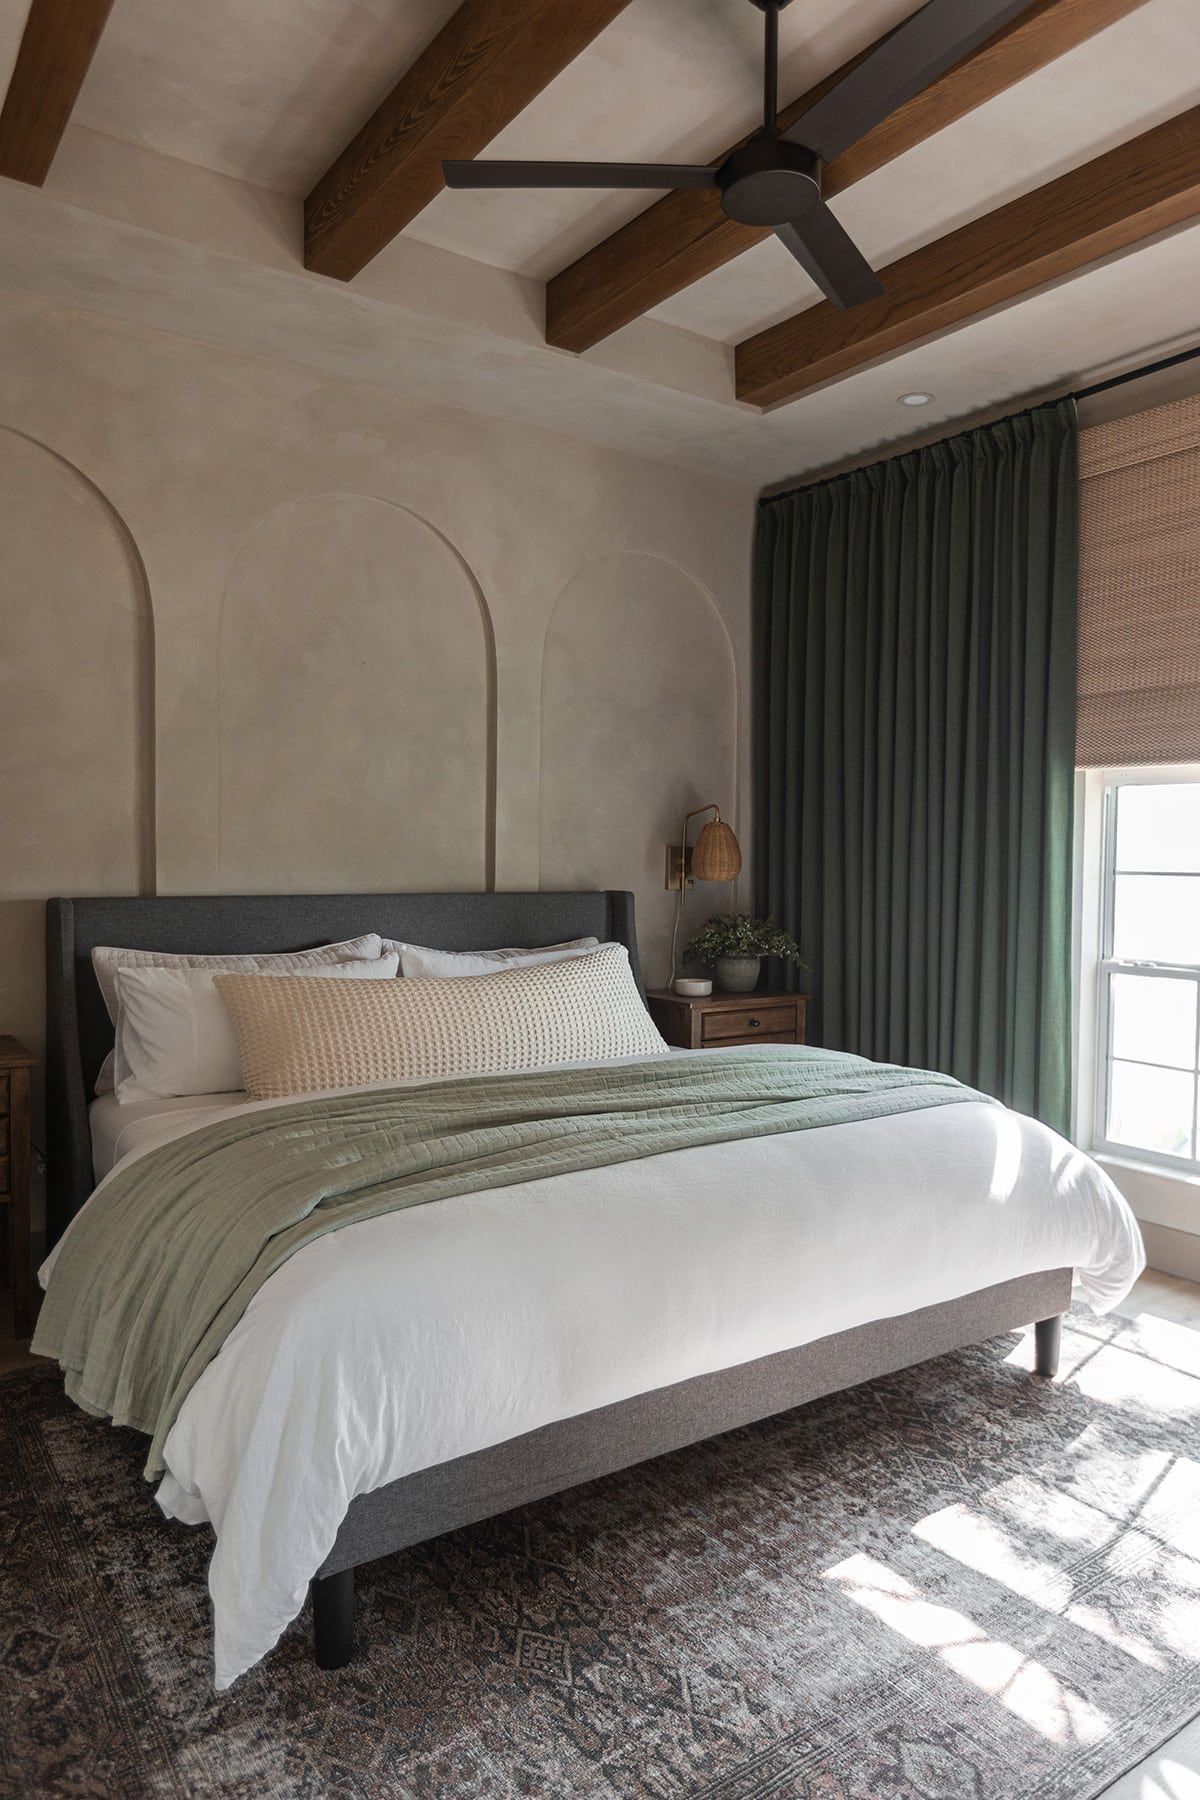 Designer Bedrooms: Creating Luxurious Retreats That Reflect Your Style